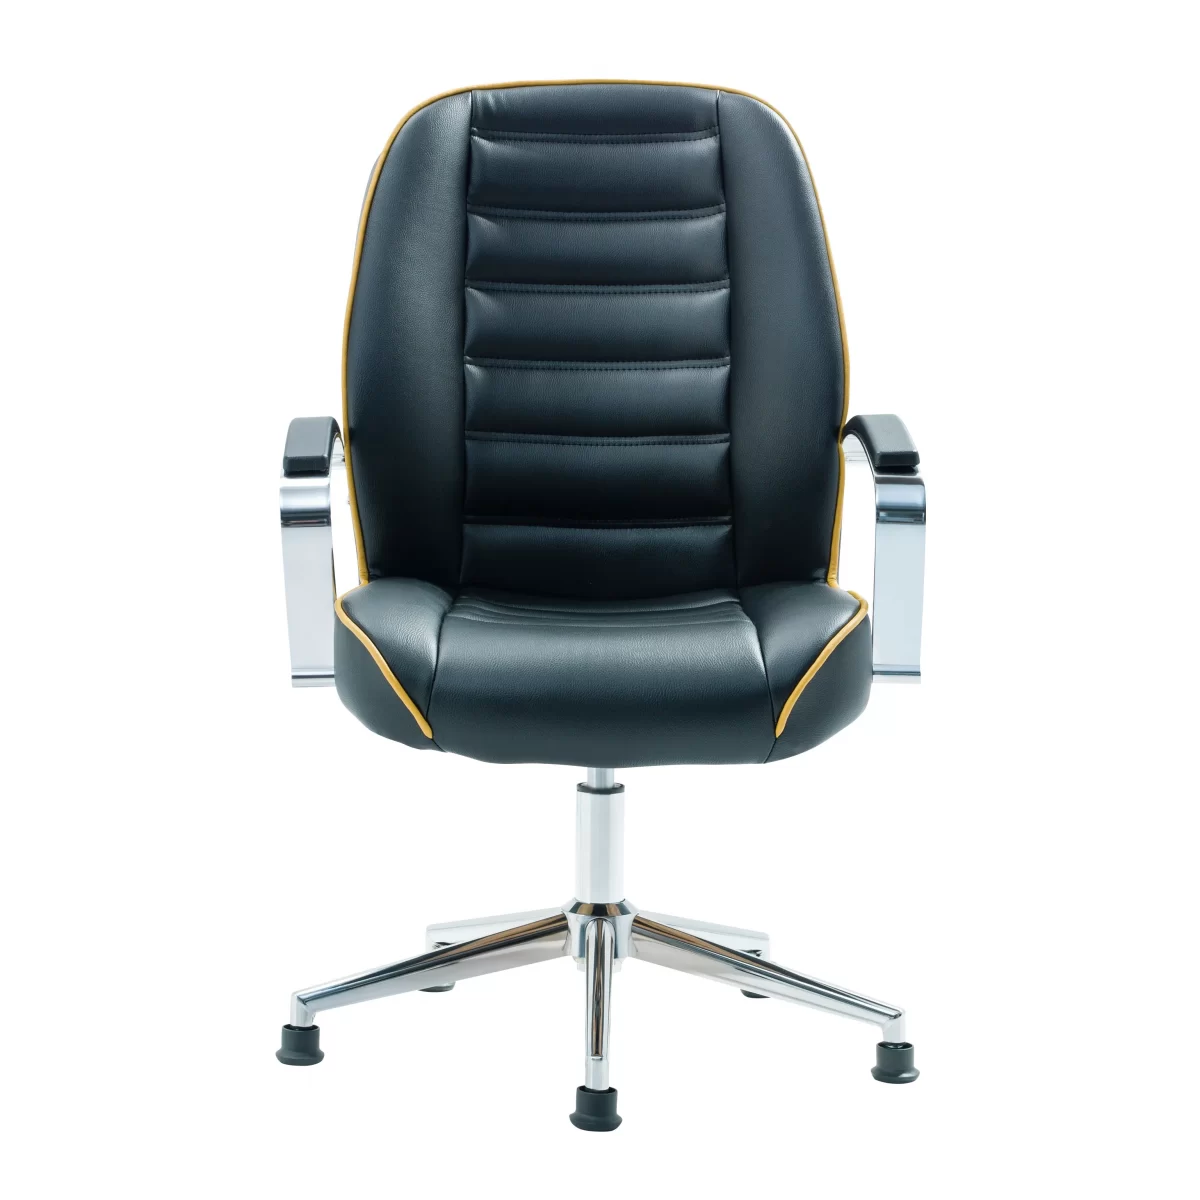 Karina Office Guest Chair Modern Office Chairs Turkey scaled